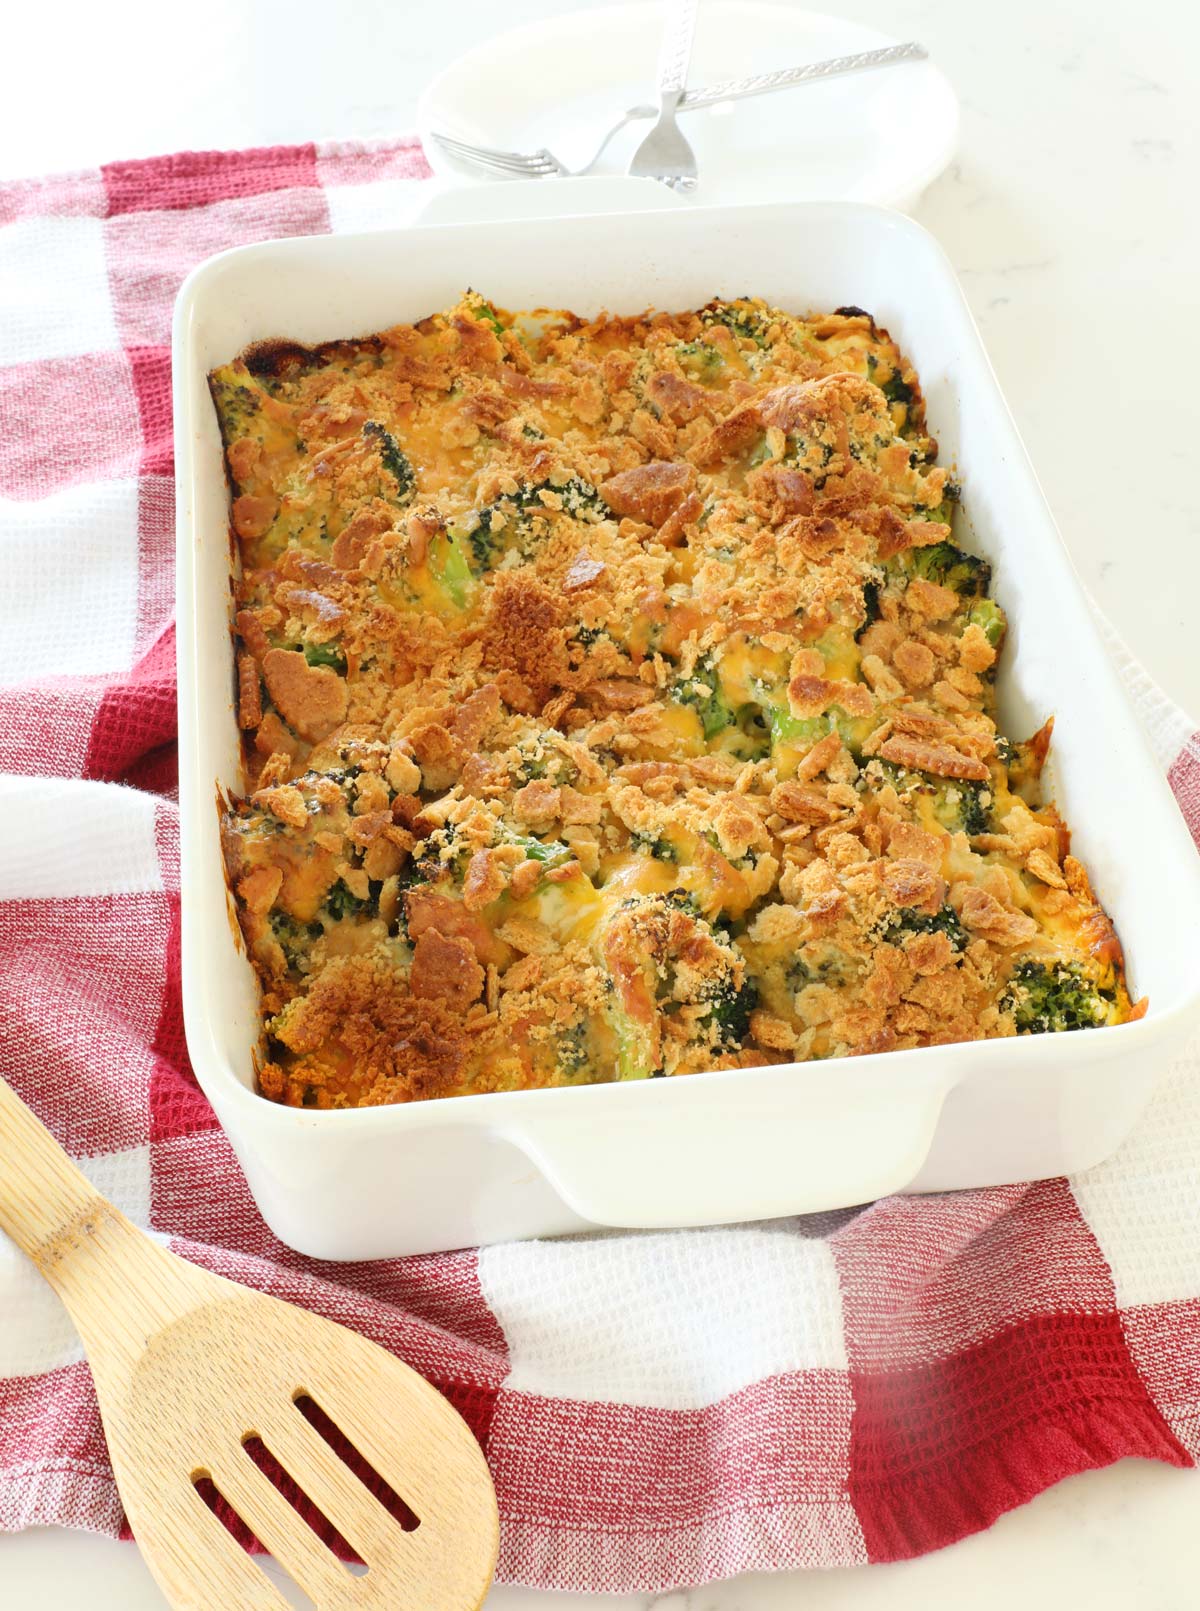 Broccoli Casserole in a baking dish on a red and white kitchen towel.